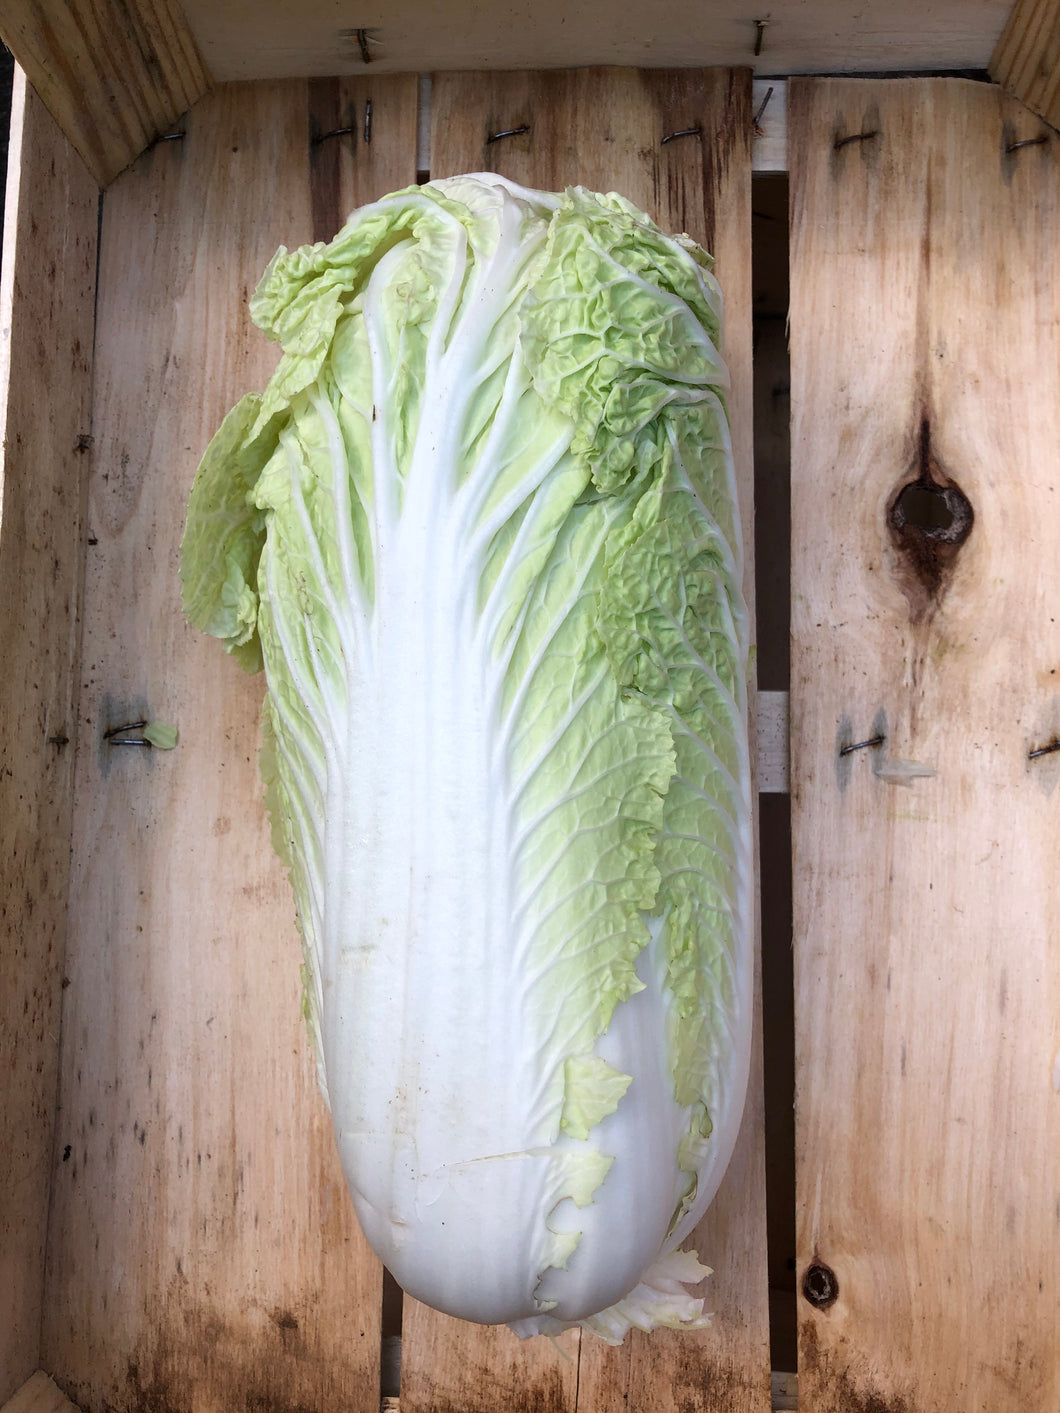 Organic Chinese Leaves (Napa Cabbage) - 2.99 each.